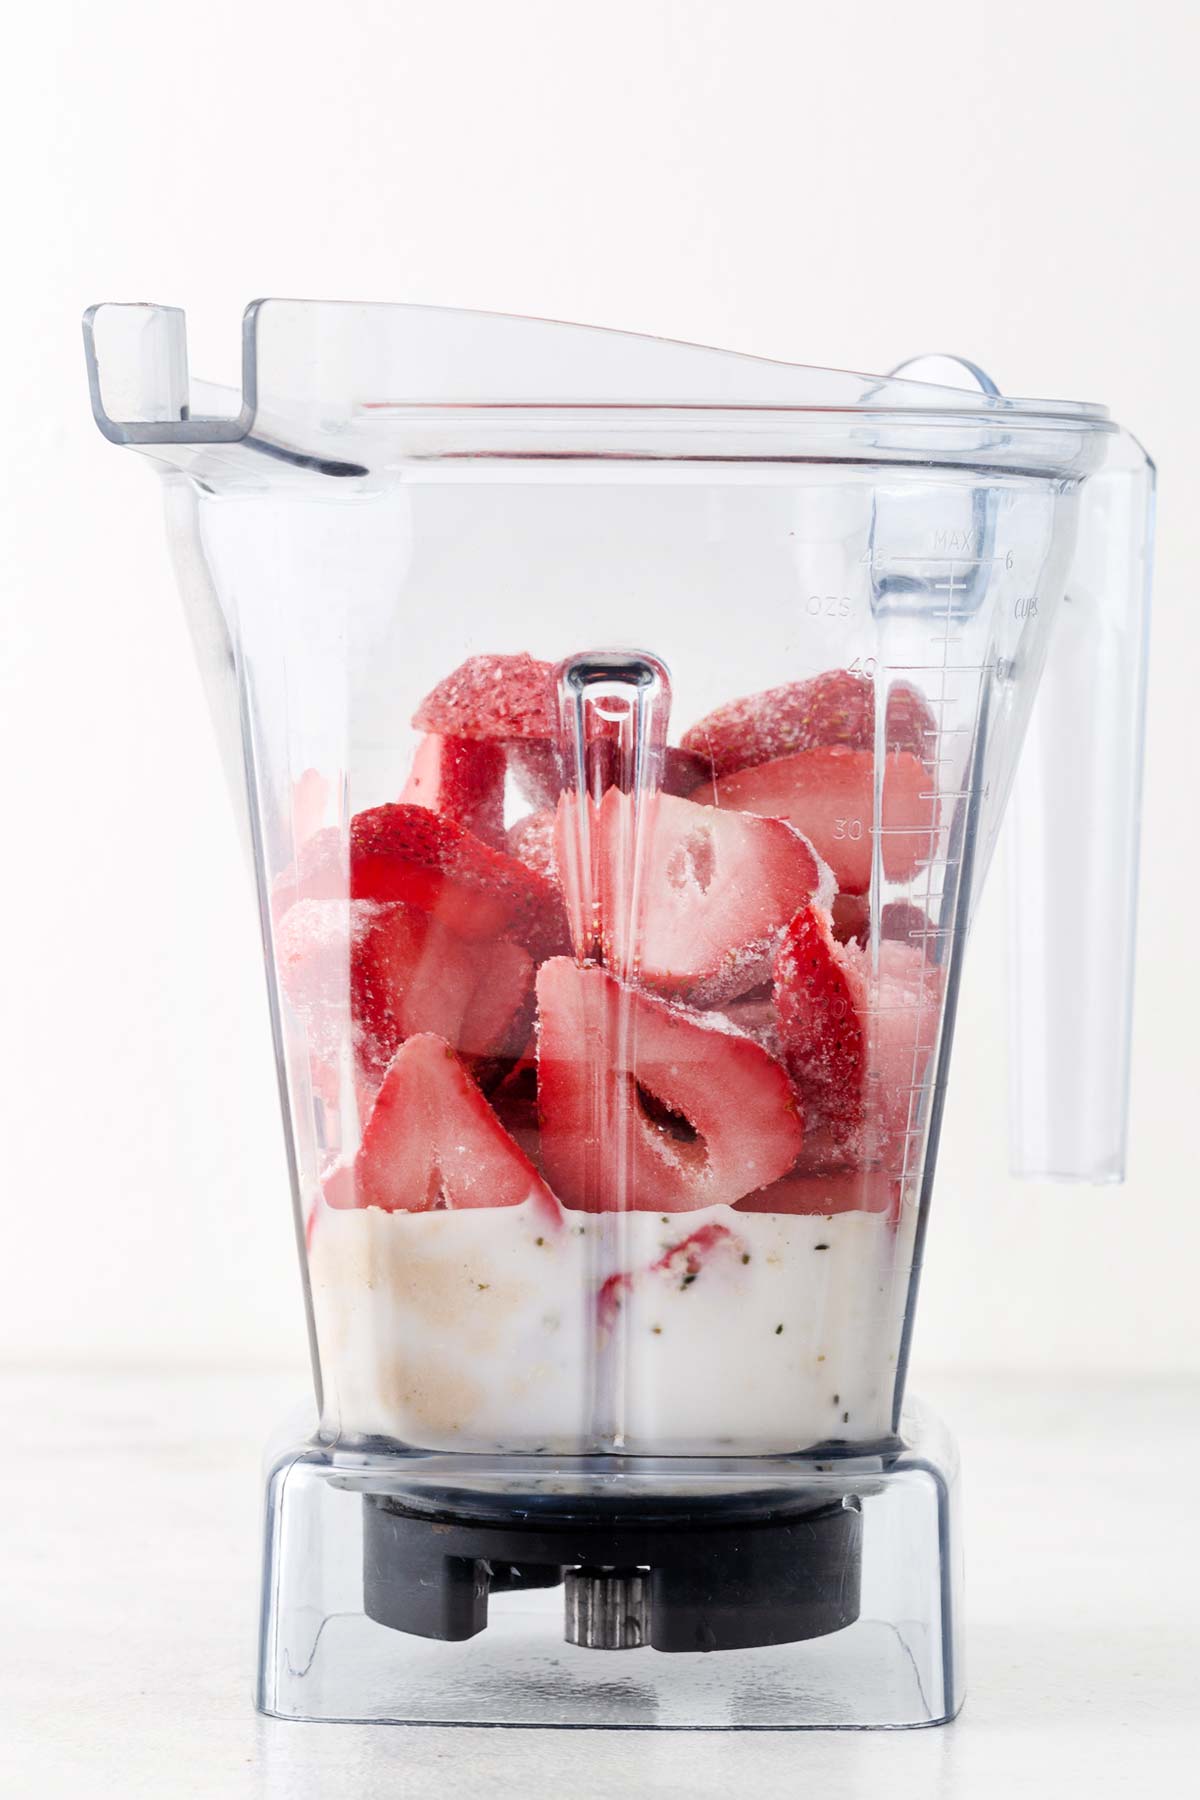 Ingredients for strawberry protein smoothie bowl in a blender.